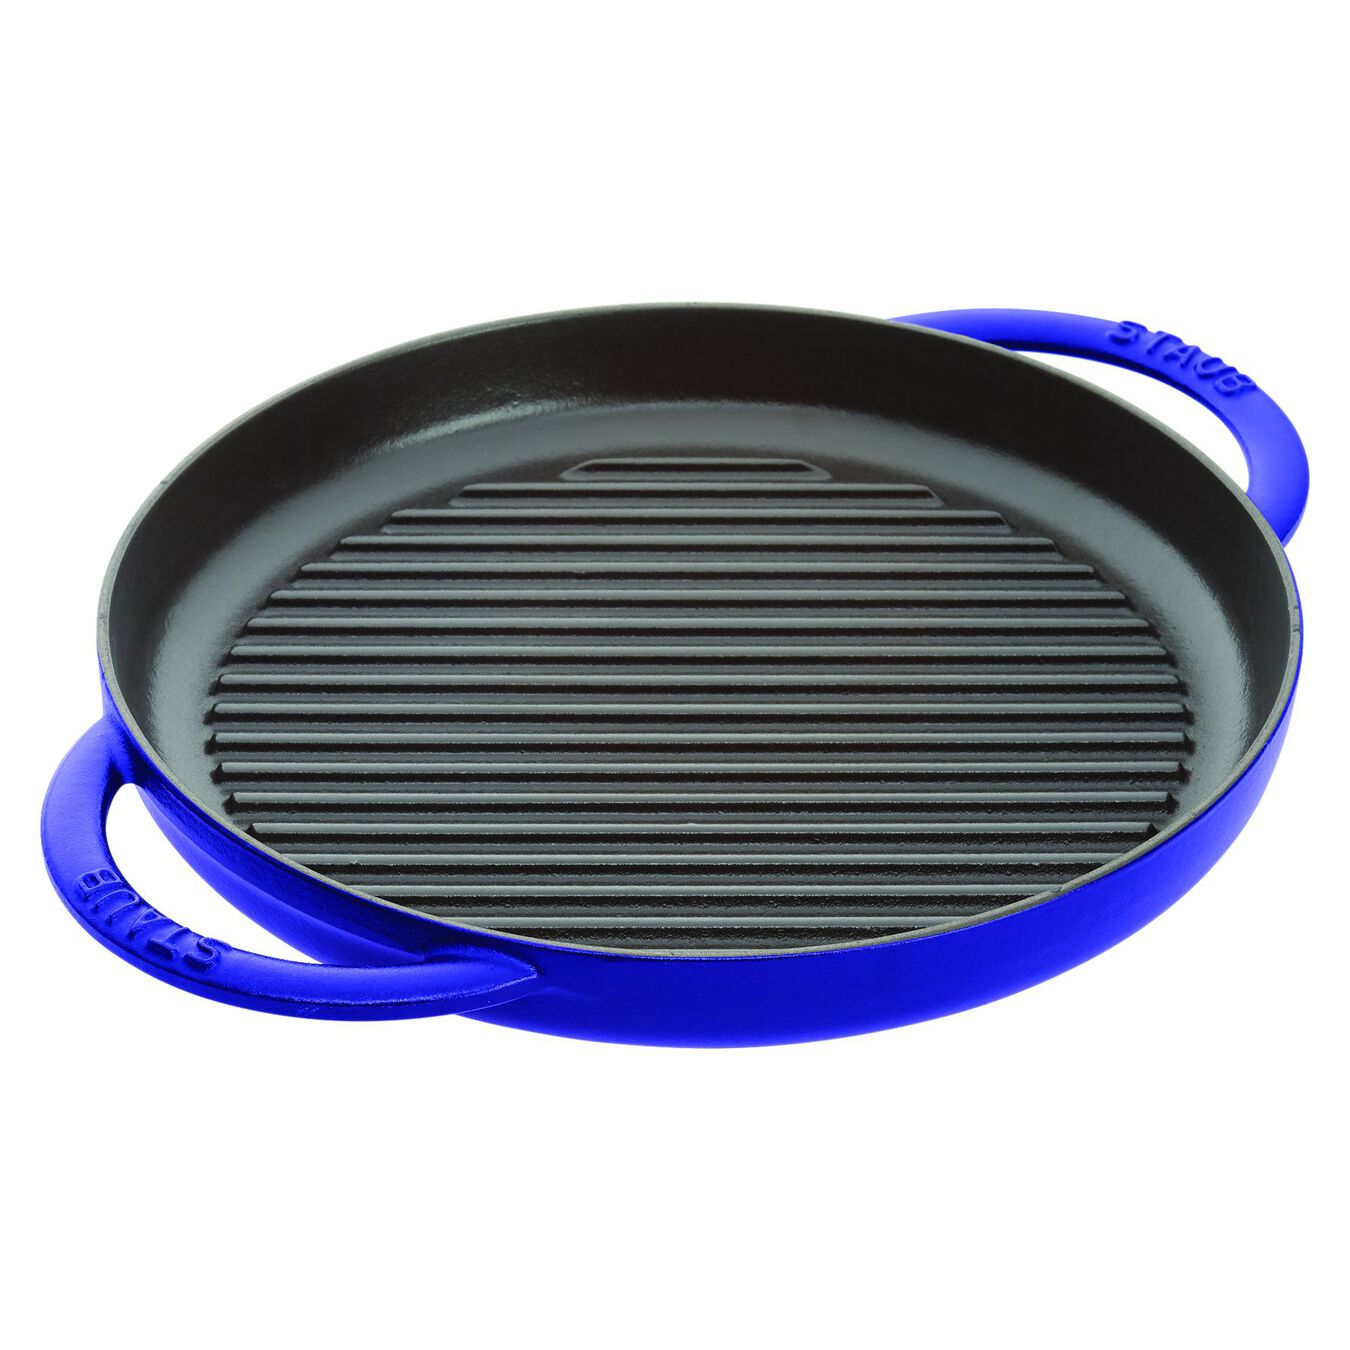 10-inch, Round Double Handle Pure Grill, dark blue,,large 2